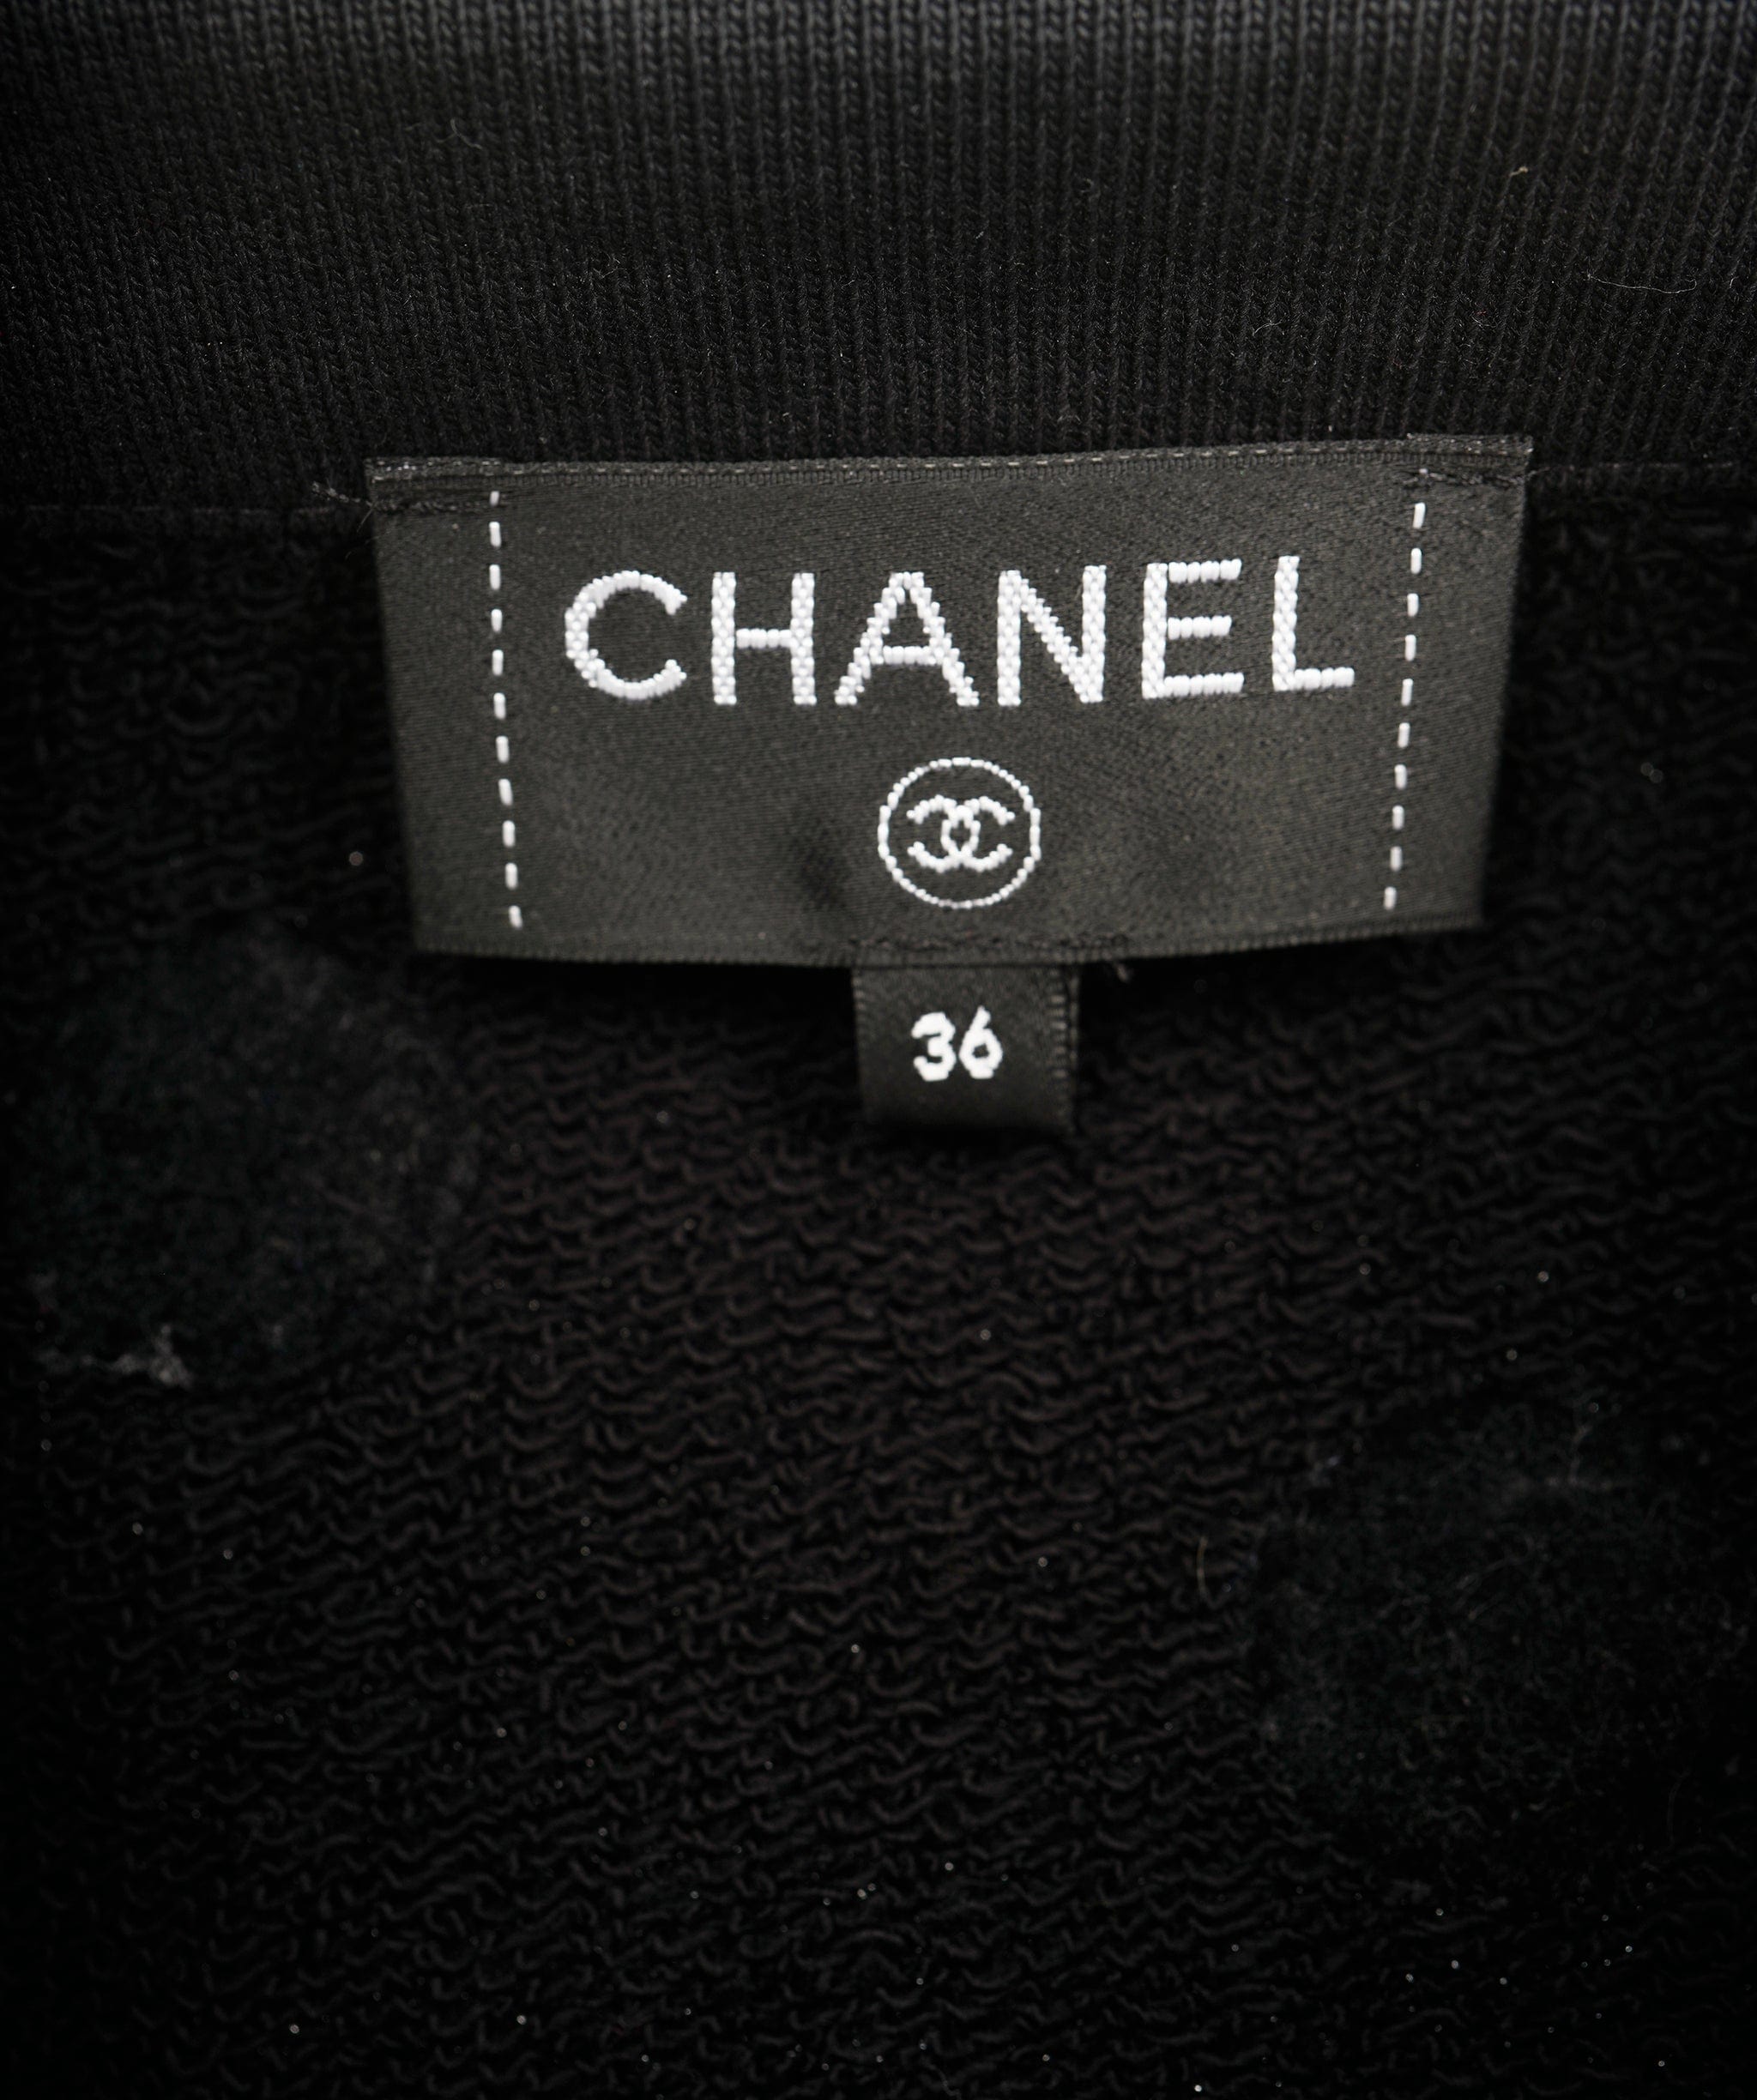 Chanel Cardigan Black with multicolored patch FR36 P71493K10289 